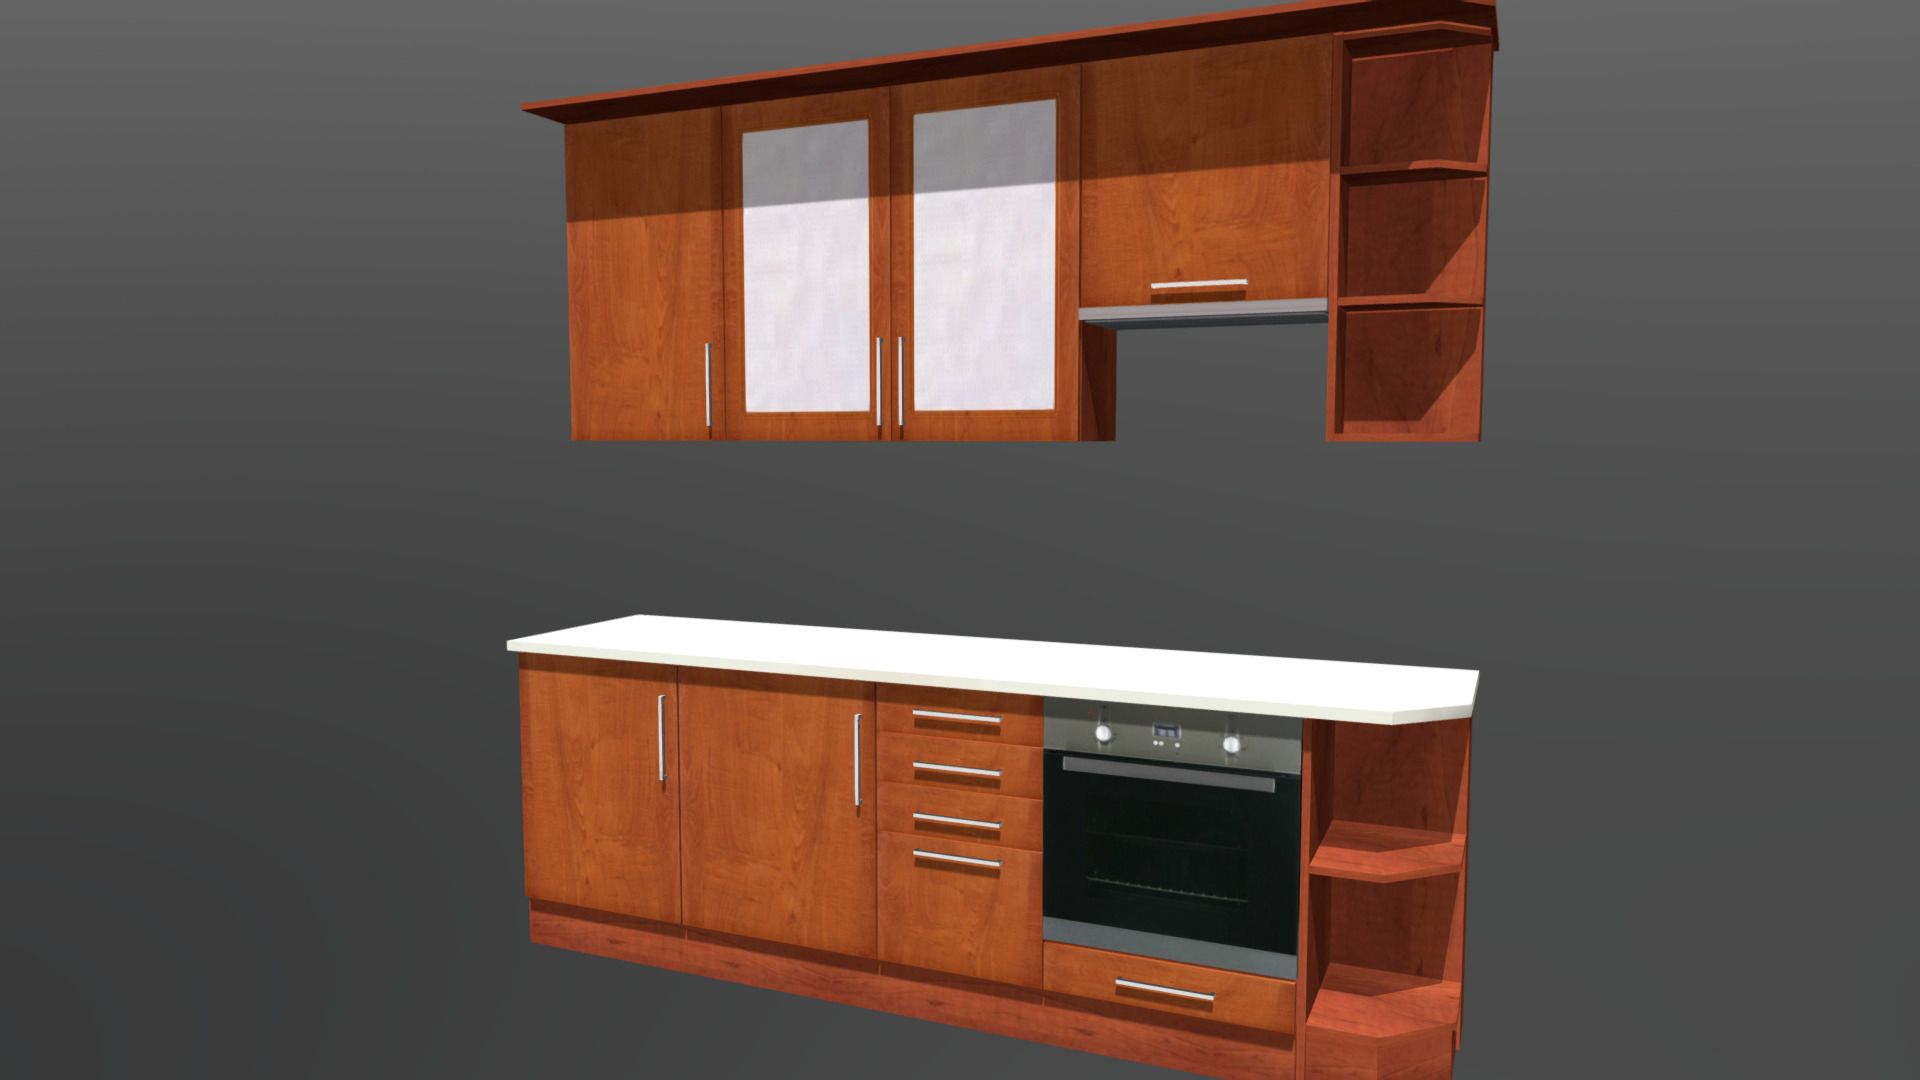 3D model Kitchen Cabinet 8 - This is a 3D model of the Kitchen Cabinet 8. The 3D model is about a kitchen with wooden cabinets.